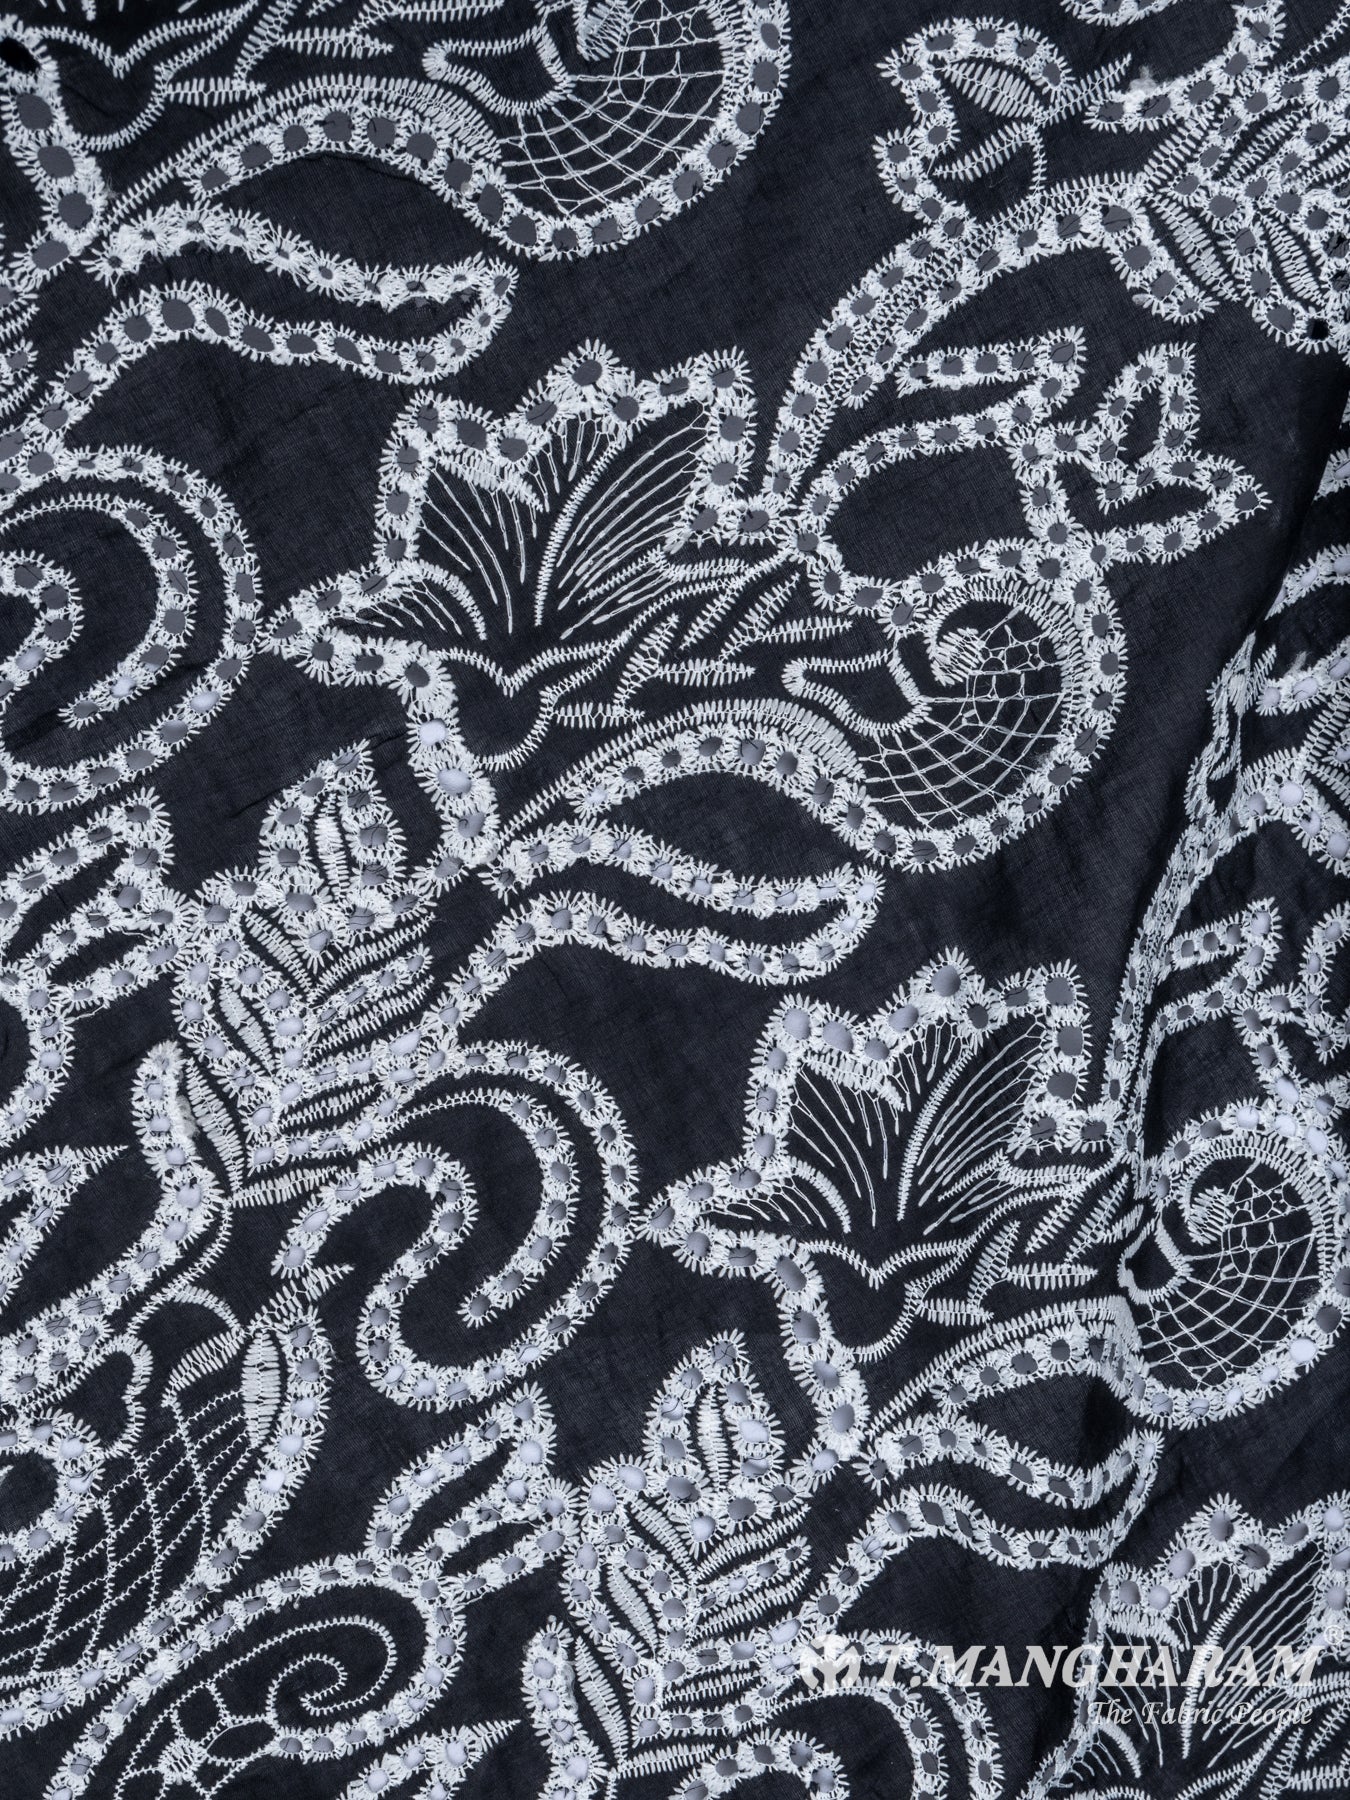 Black Cotton Embroidery Fabric - EC6744 view-3